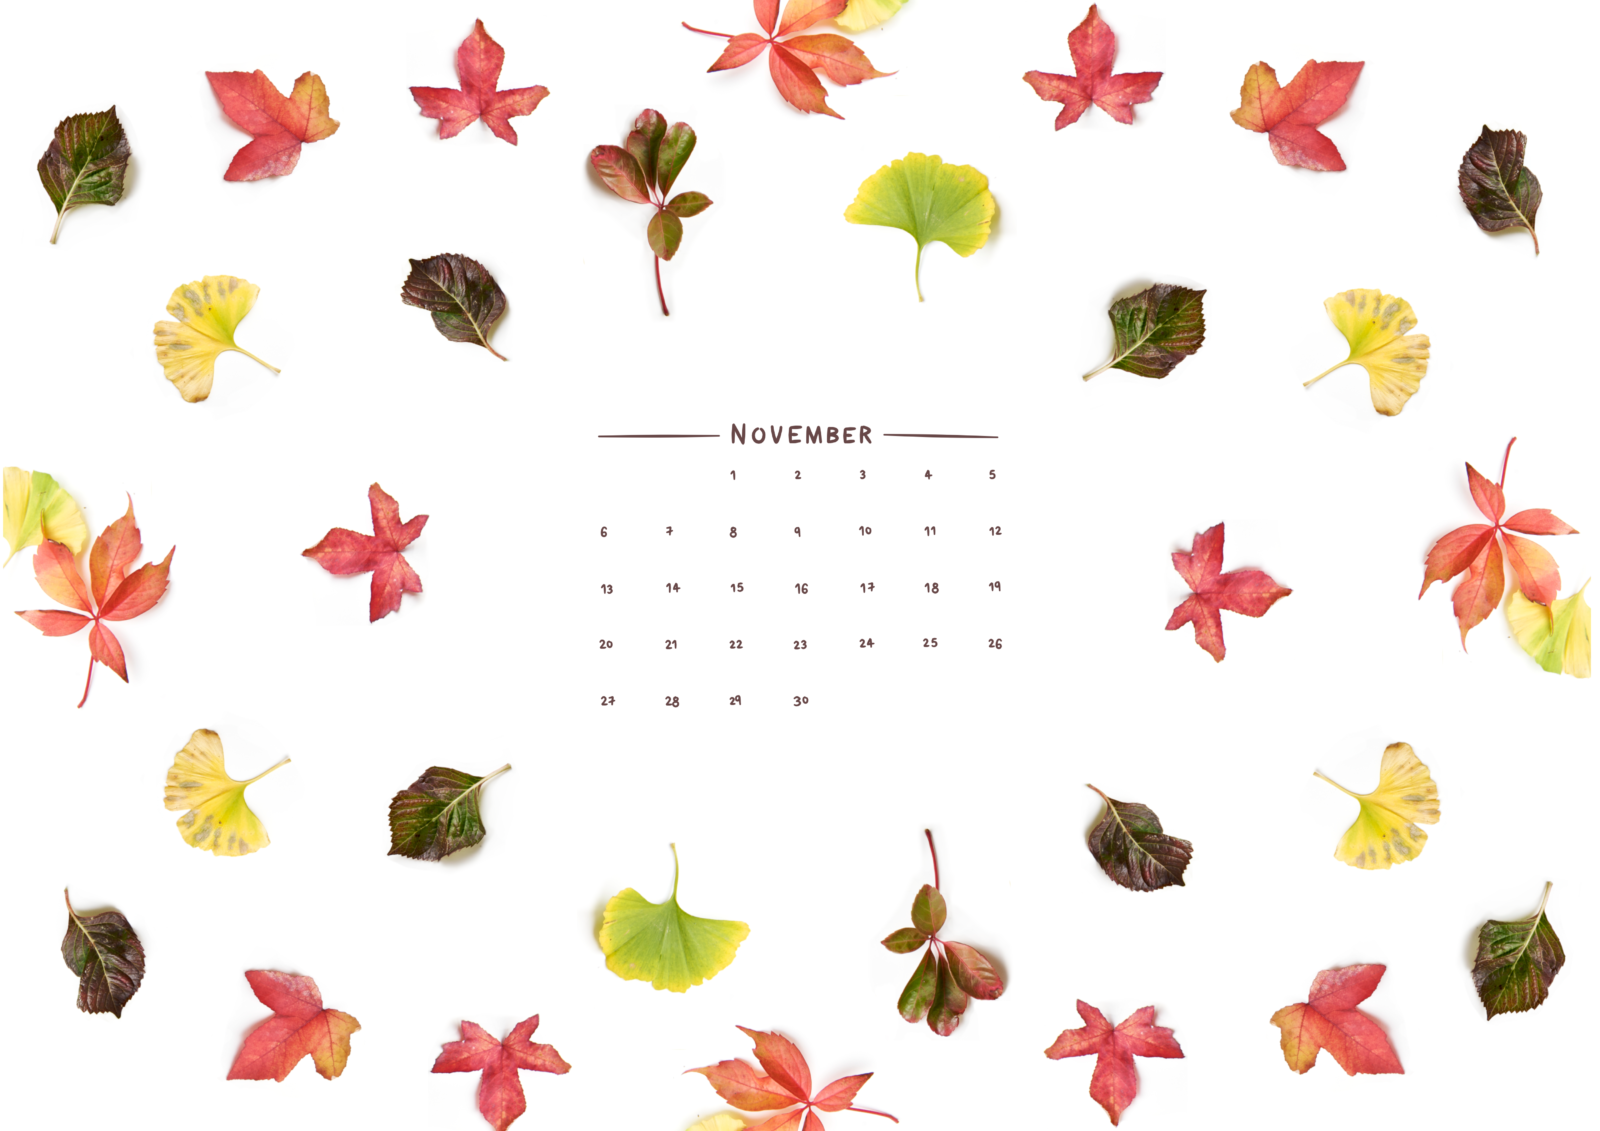 FREE November Wall Paper – Work Over Easy